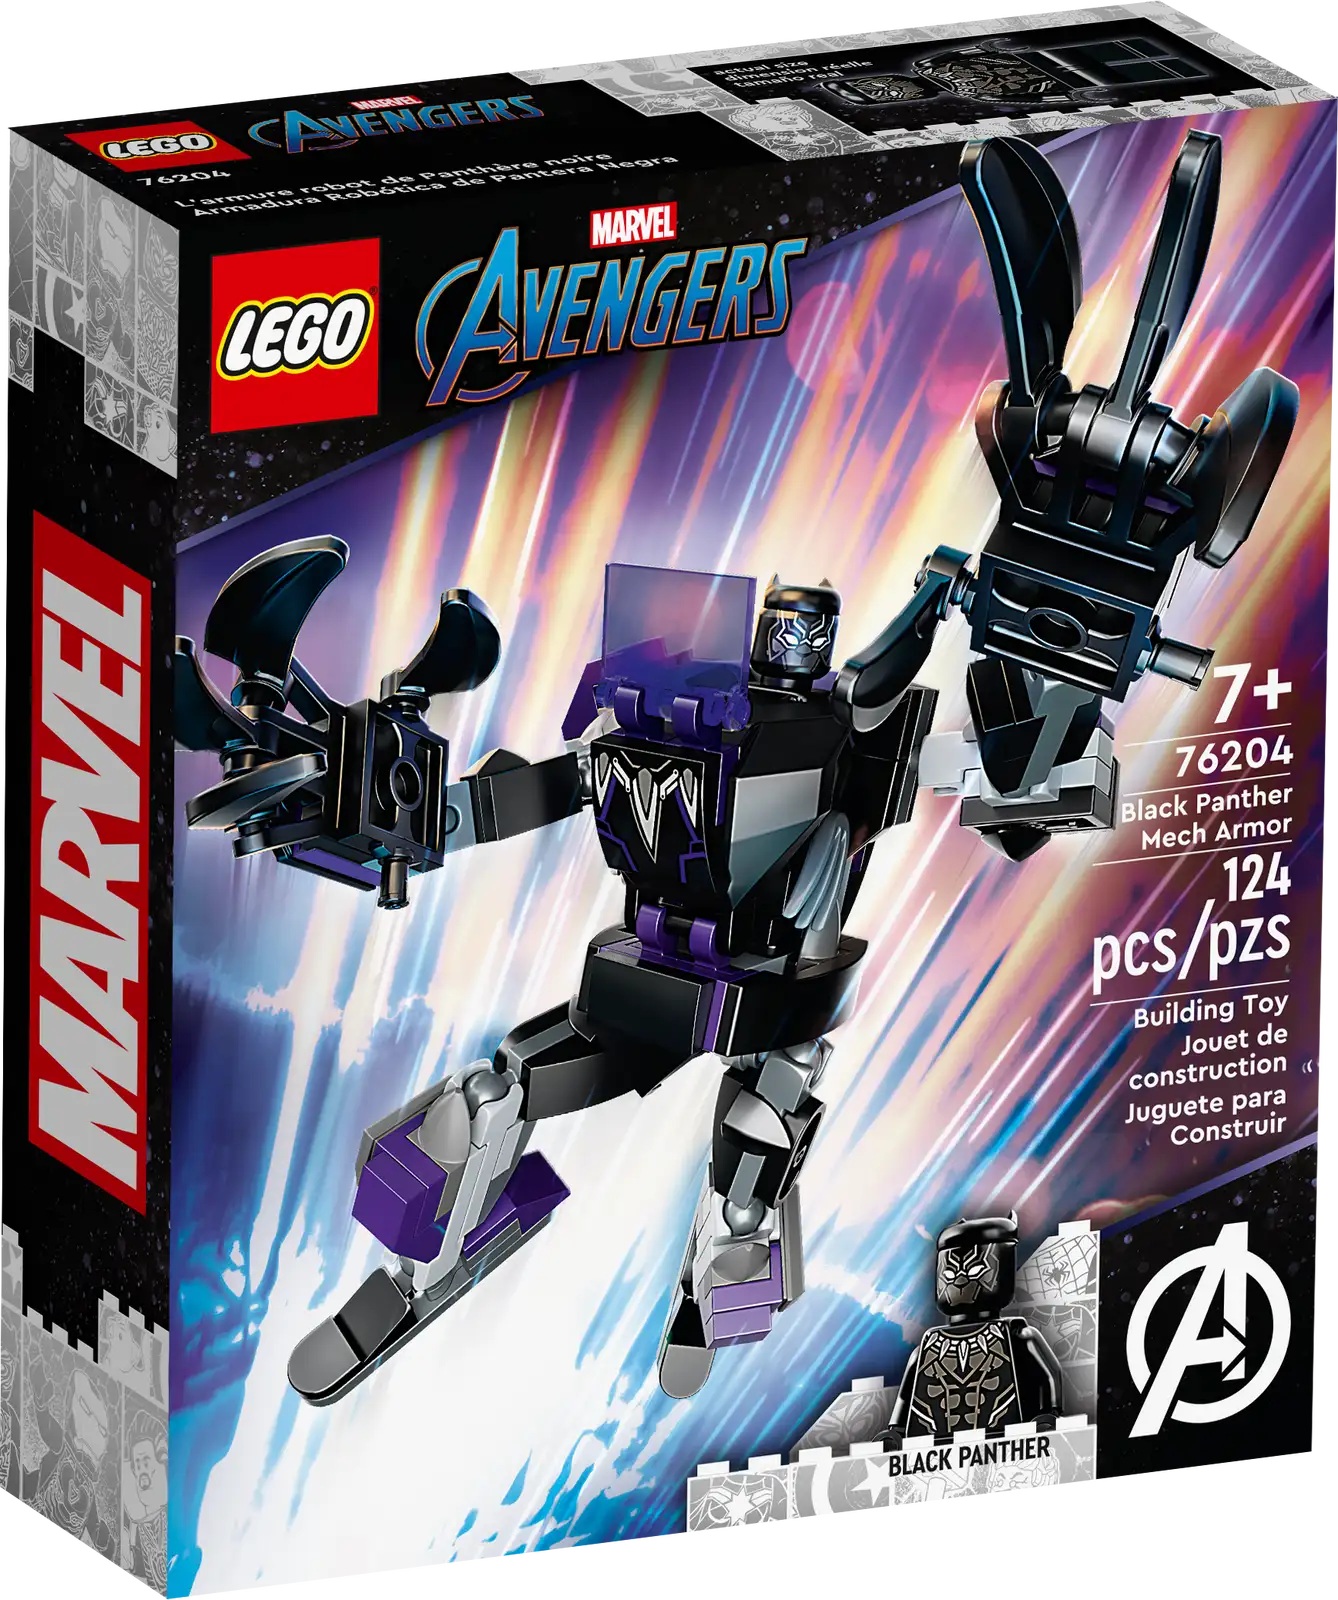 LEGO® Marvel Black Panther Mech Armor (76204) is a giant-sized treat for Black Panther fans aged 7 and up! This mighty play-and-display mech transforms the clawed Avenger into a supersized, Super-Hero warrior. Marvel action with a mighty mech Put mega Marvel adventures into kids’ hands. When they place the Black Panther minifigure into the cockpit of the Black Panther mech, its huge, movable arms, legs and crushing claws guarantee endless Super-Hero action as they battle bad guys, take on other mechs and recreate favorite Marvel movie scenes. And, when the day’s action is over, the Black Panther mech looks awesome on display in any kid’s room. Mechanical warrior – The LEGO® Marvel Black Panther Mech Armor (76204) is a fun treat for any young Super Hero Iconic Super Hero – Includes a Black Panther minifigure and a buildable Black Panther mech with fully jointed arms, legs and protruding claws Endless imaginative play – Kids put the Black Panther minifigure into the mech’s opening cockpit, then use the movable mech to battle bad guys and play out Super-Hero adventures of their own Treat for Marvel fans – This versatile mech can be given as a birthday, holiday or just-because gift to kids aged 7 and up Pick-up-and-play – Standing over 5.5 in. (15 cm) tall, this movable mech with jointed limbs is both posable and portable Collectible mechs – There are lots more LEGO® Marvel mechs for kids to collect and use to create their own multi-mech battles Quality guaranteed – LEGO® components fulfill stringent industry quality standards to ensure they are consistent, compatible and connect and pull apart easily every time Safety assured – LEGO® components are dropped, heated, crushed, twisted and analyzed to make sure they satisfy rigorous global safety standards